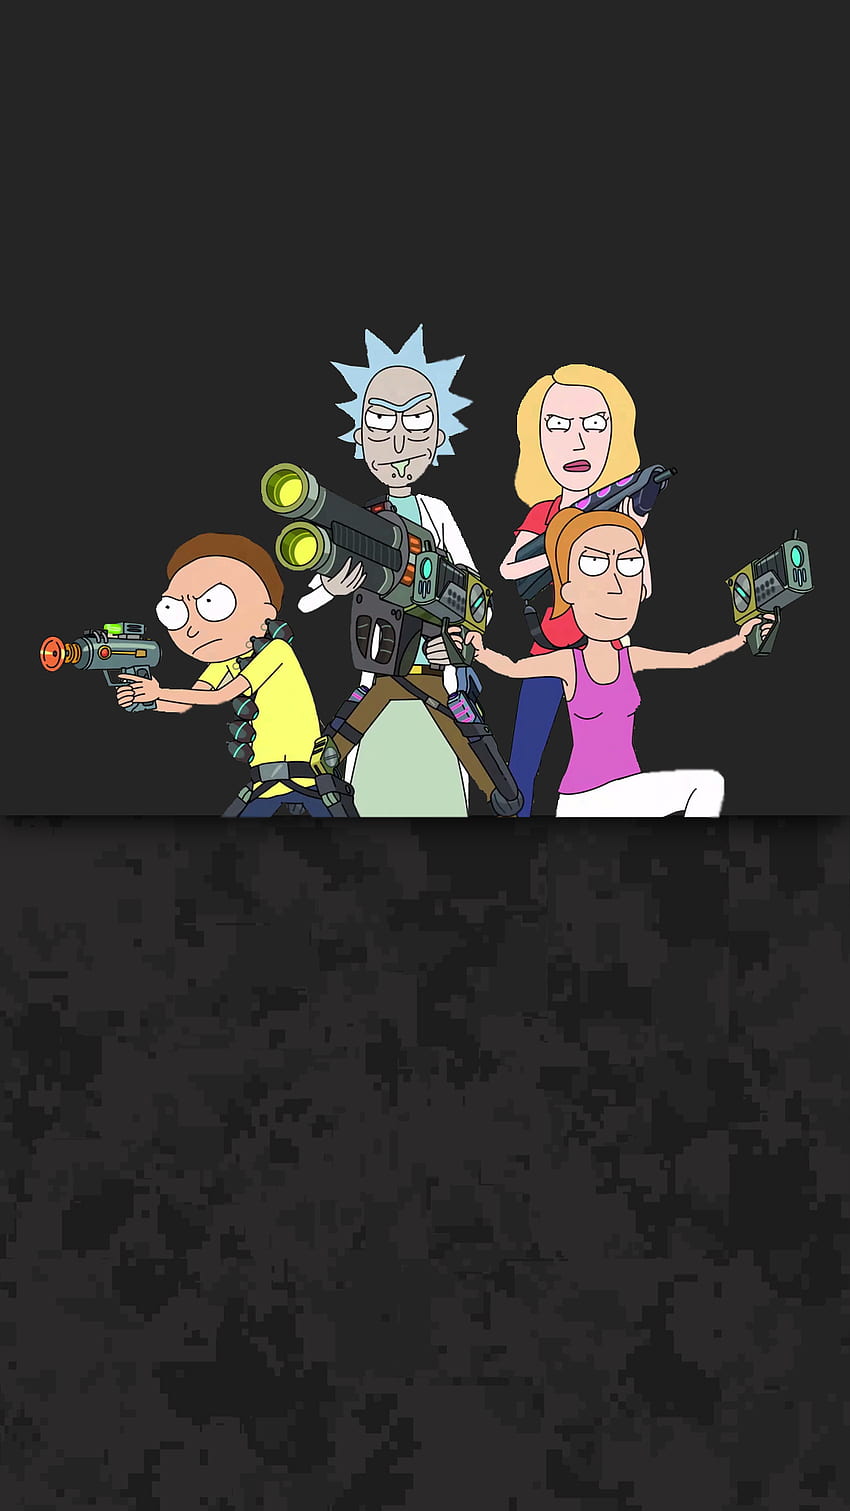 Wallpaper ID 331762  TV Show Rick and Morty Phone Wallpaper Morty Smith  Run The Jewels 1440x2560 free download